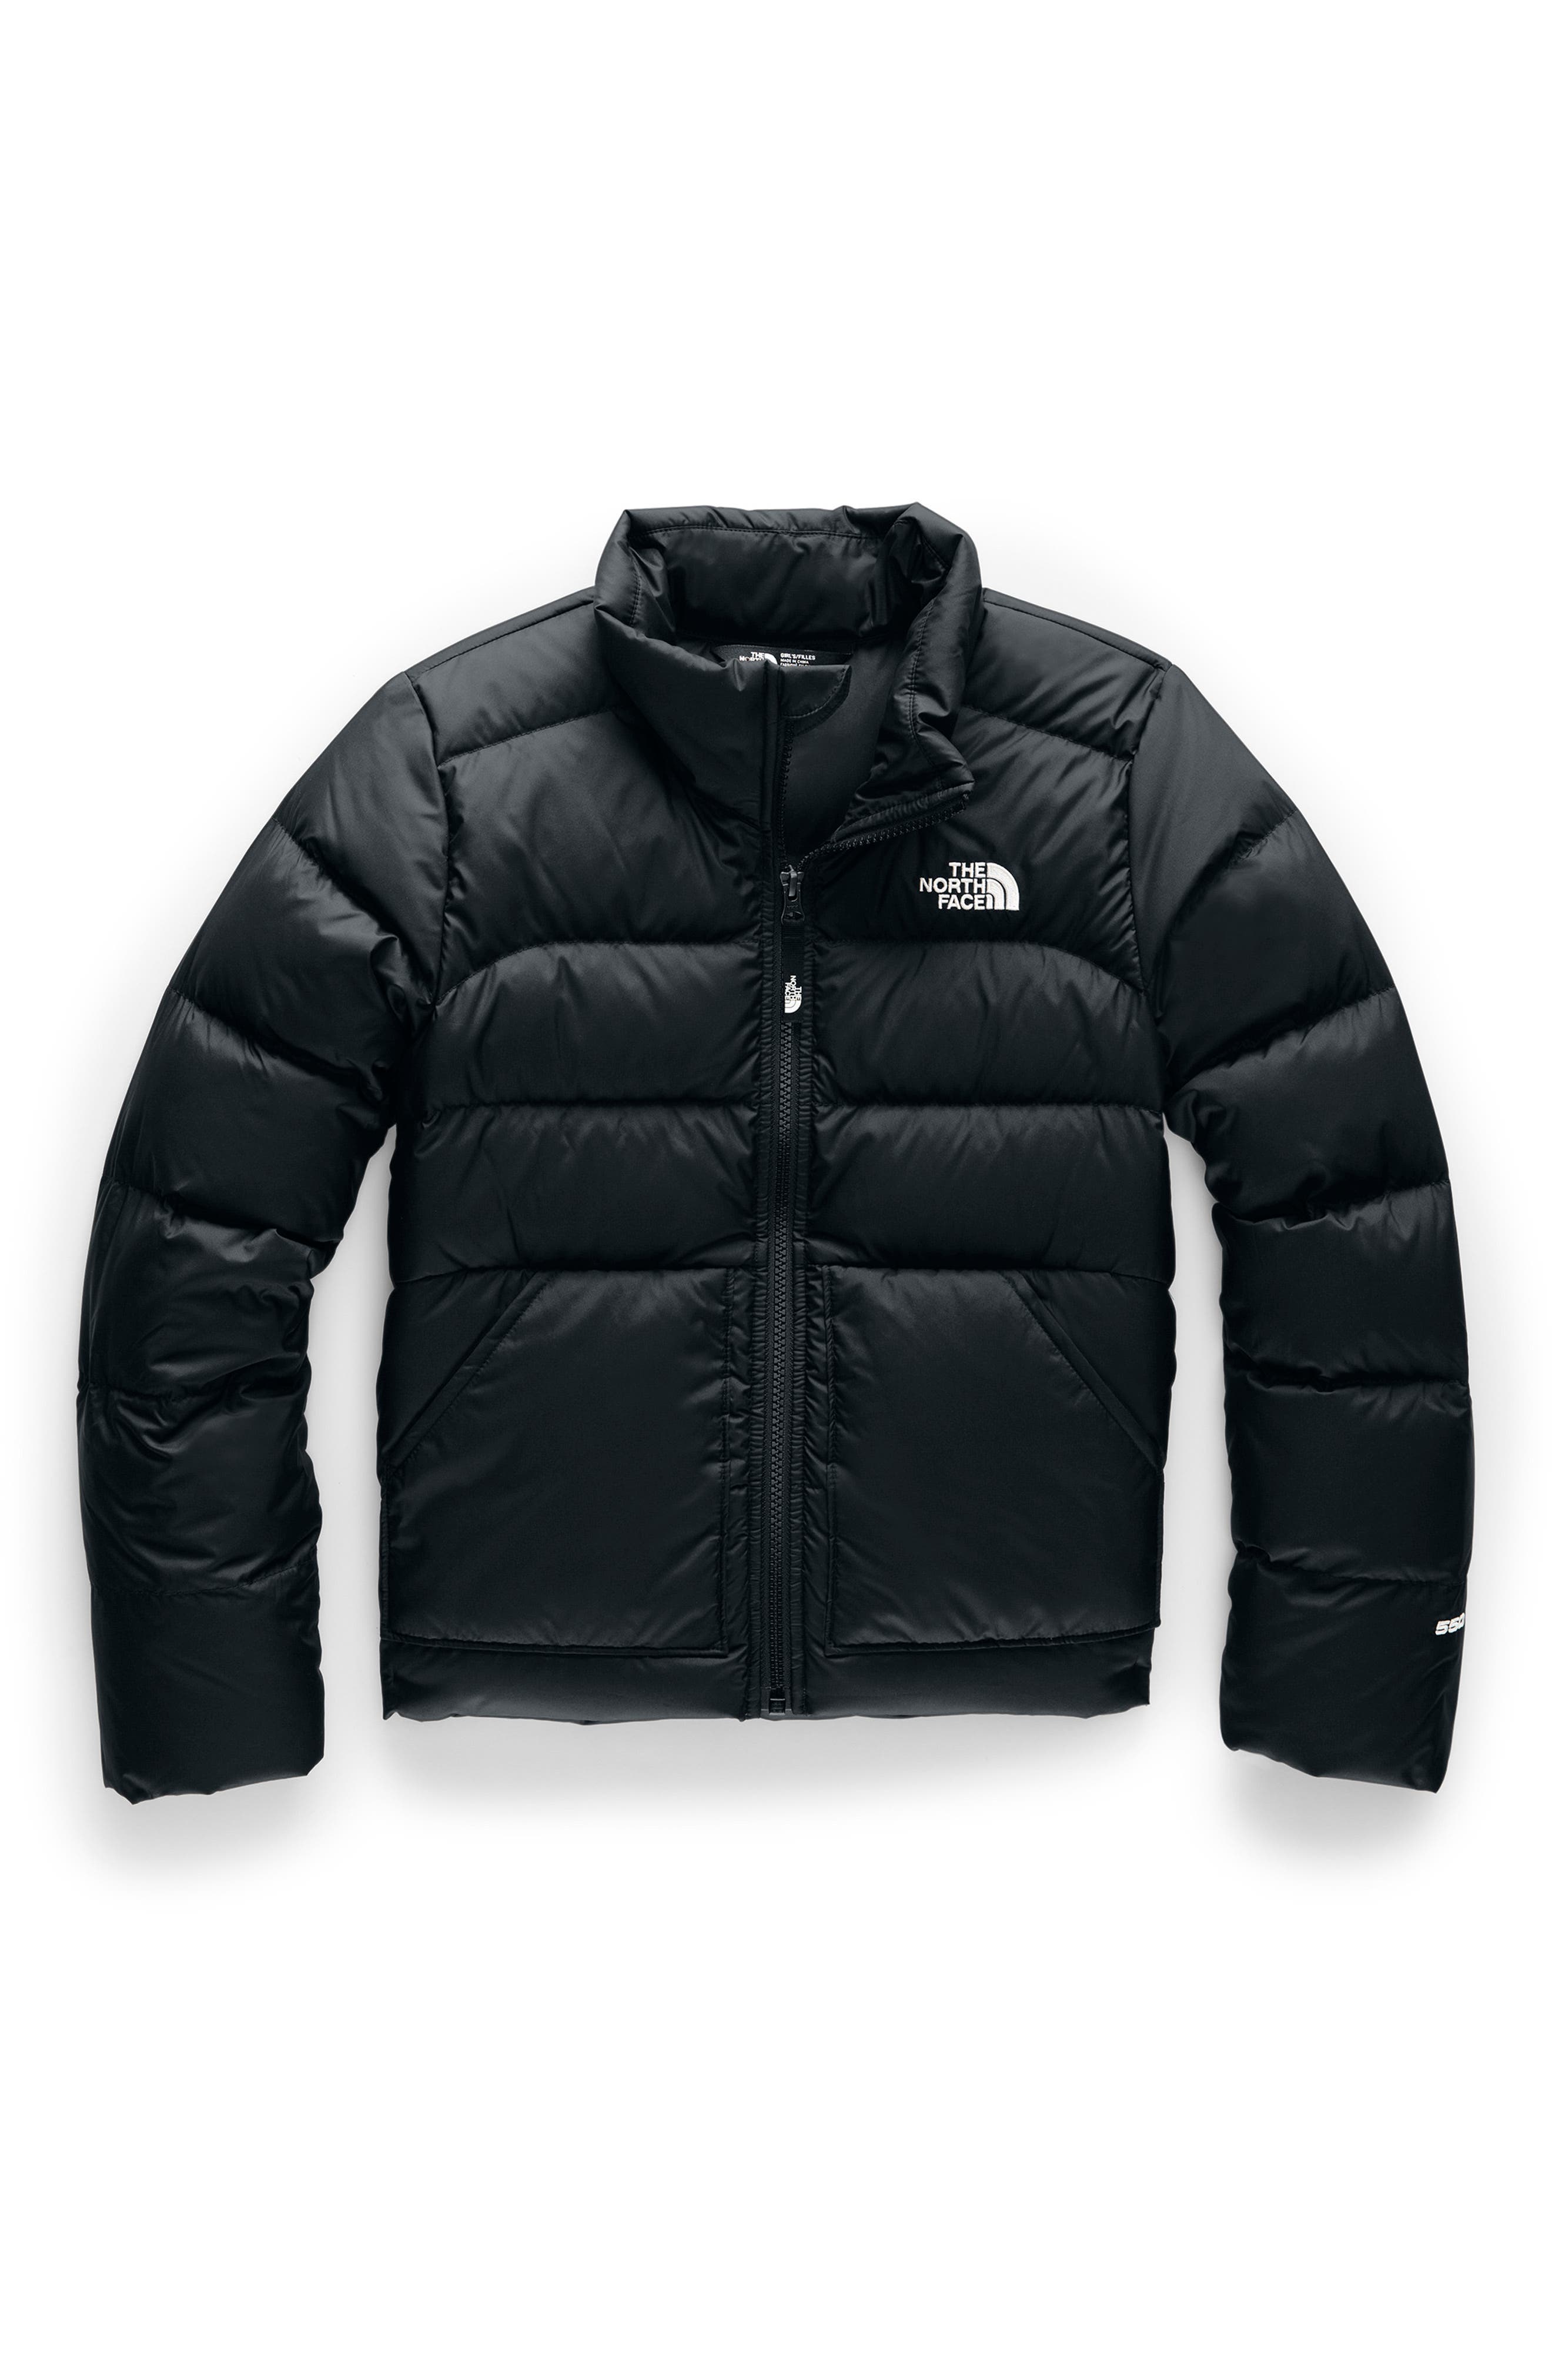 the north face 550 jacket